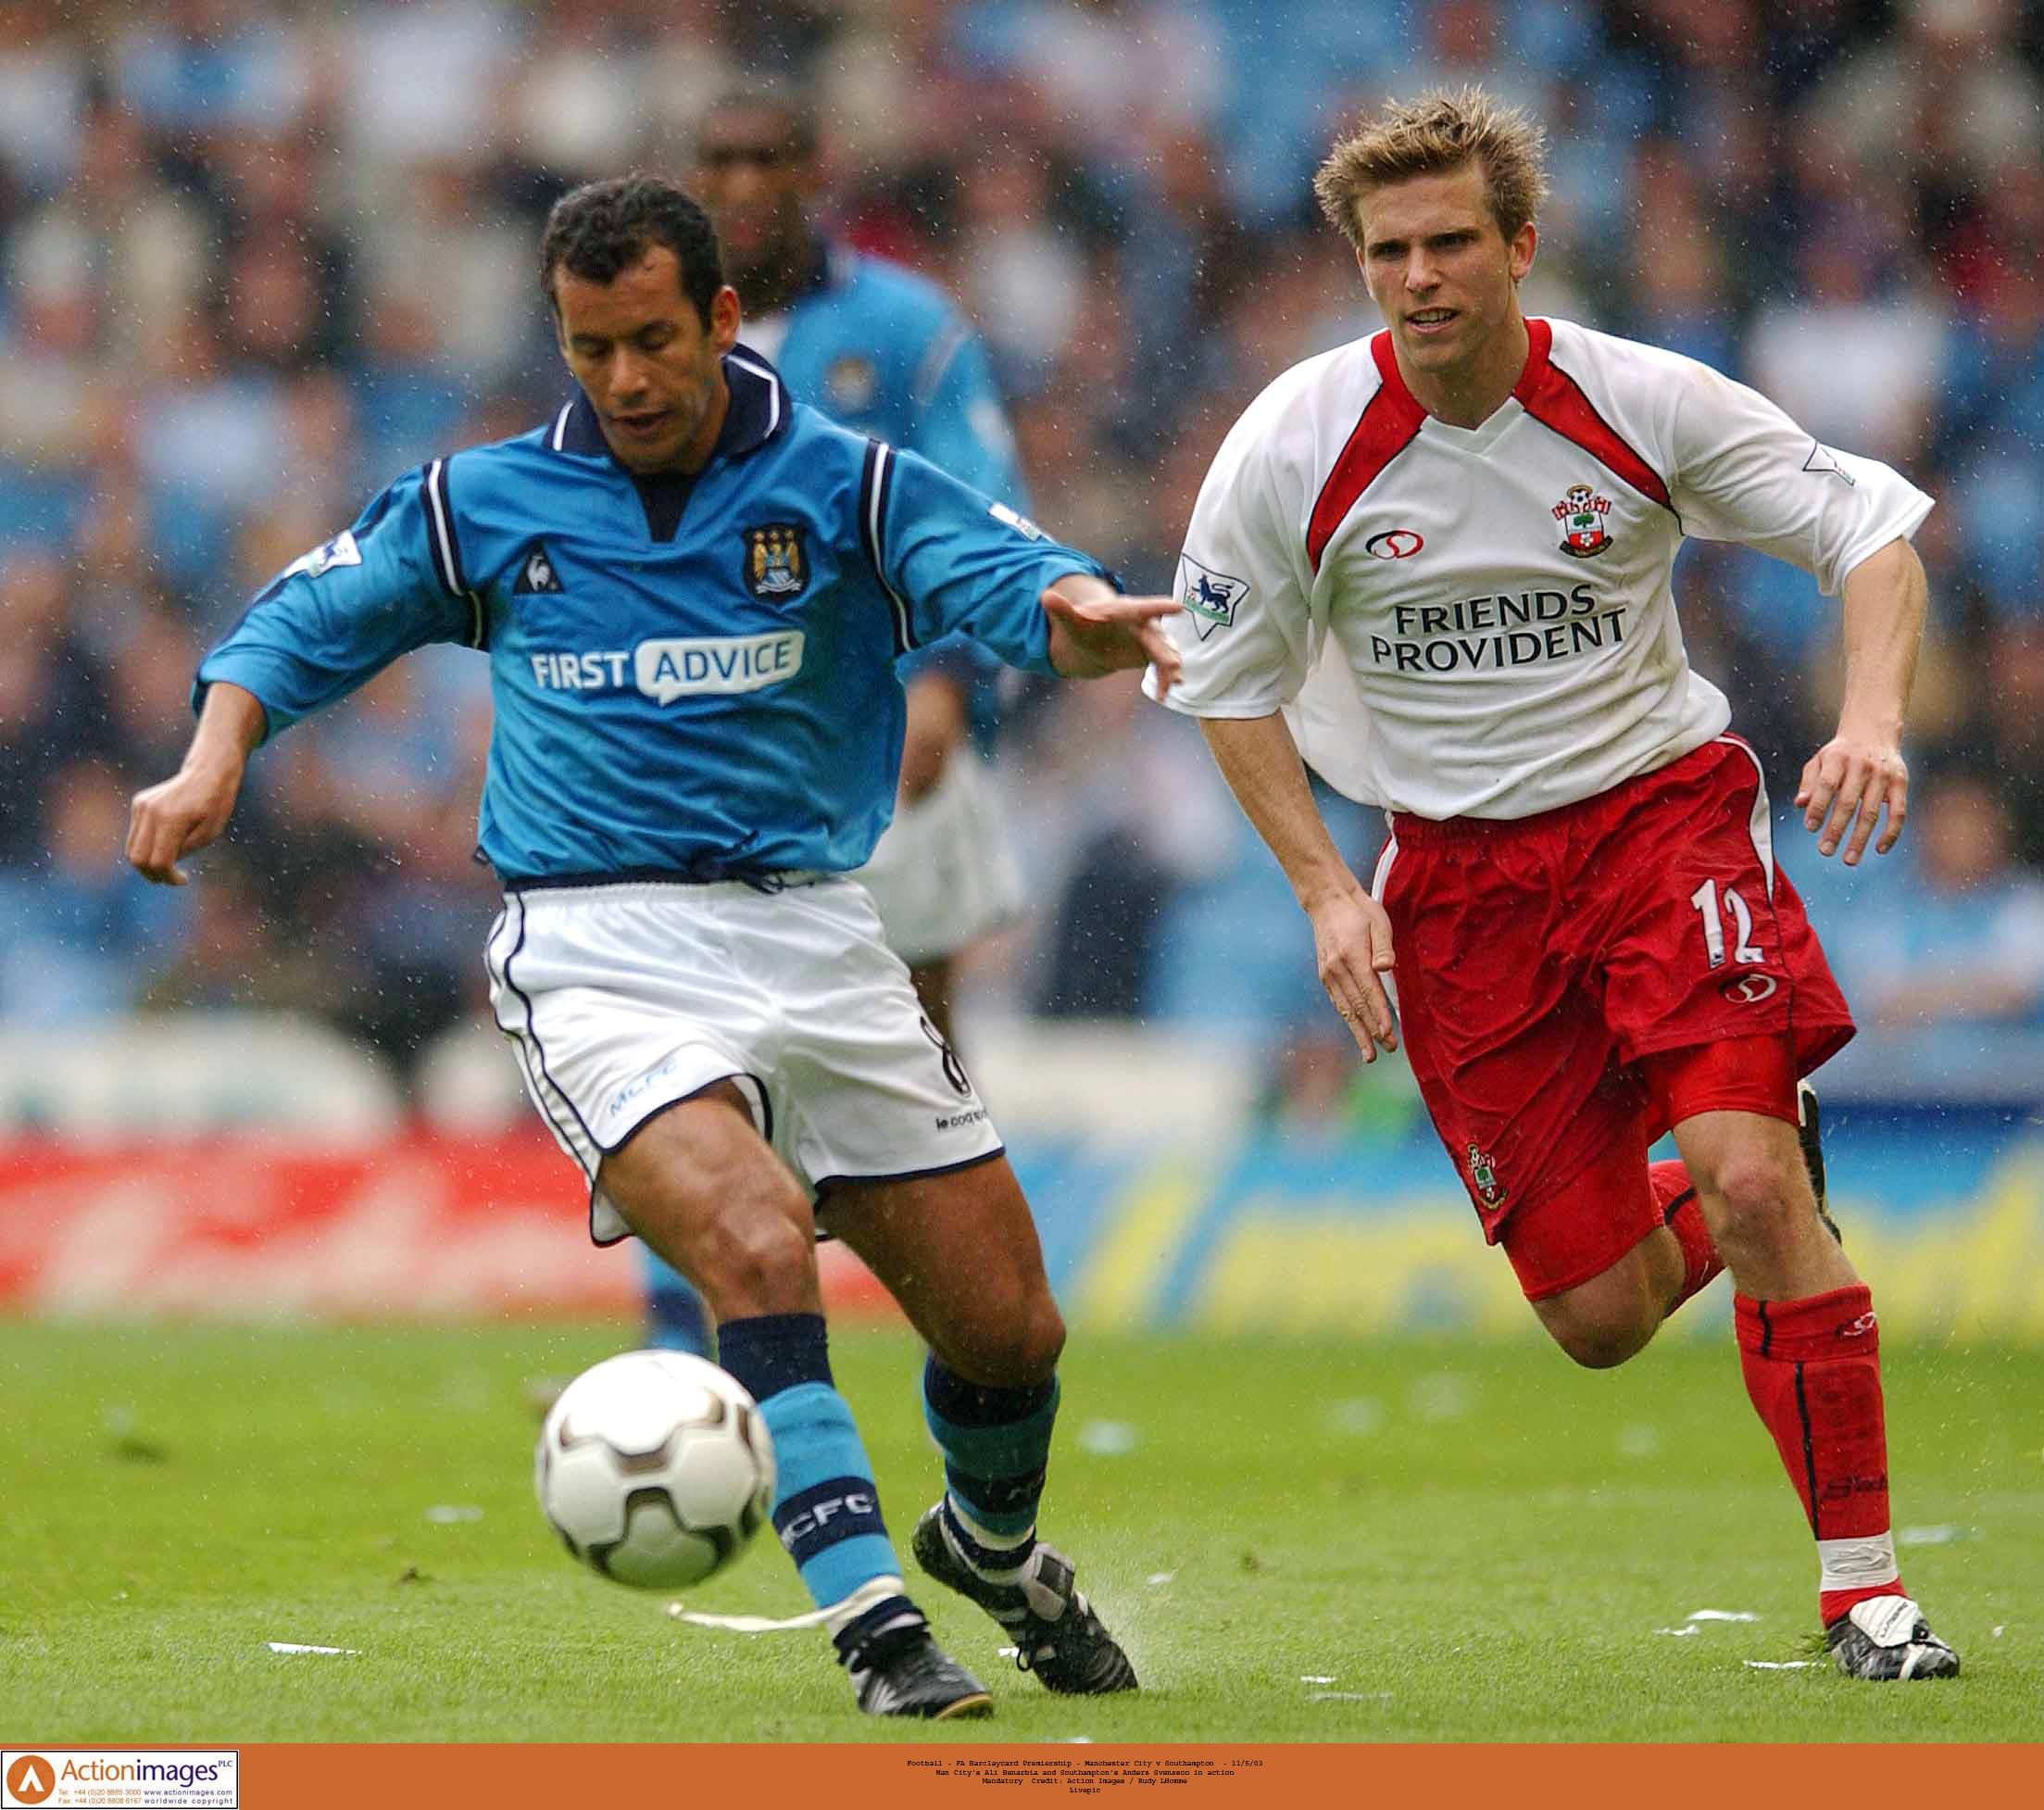 Man City's Ali Benarbia and Southampton's Anders Svensson in action